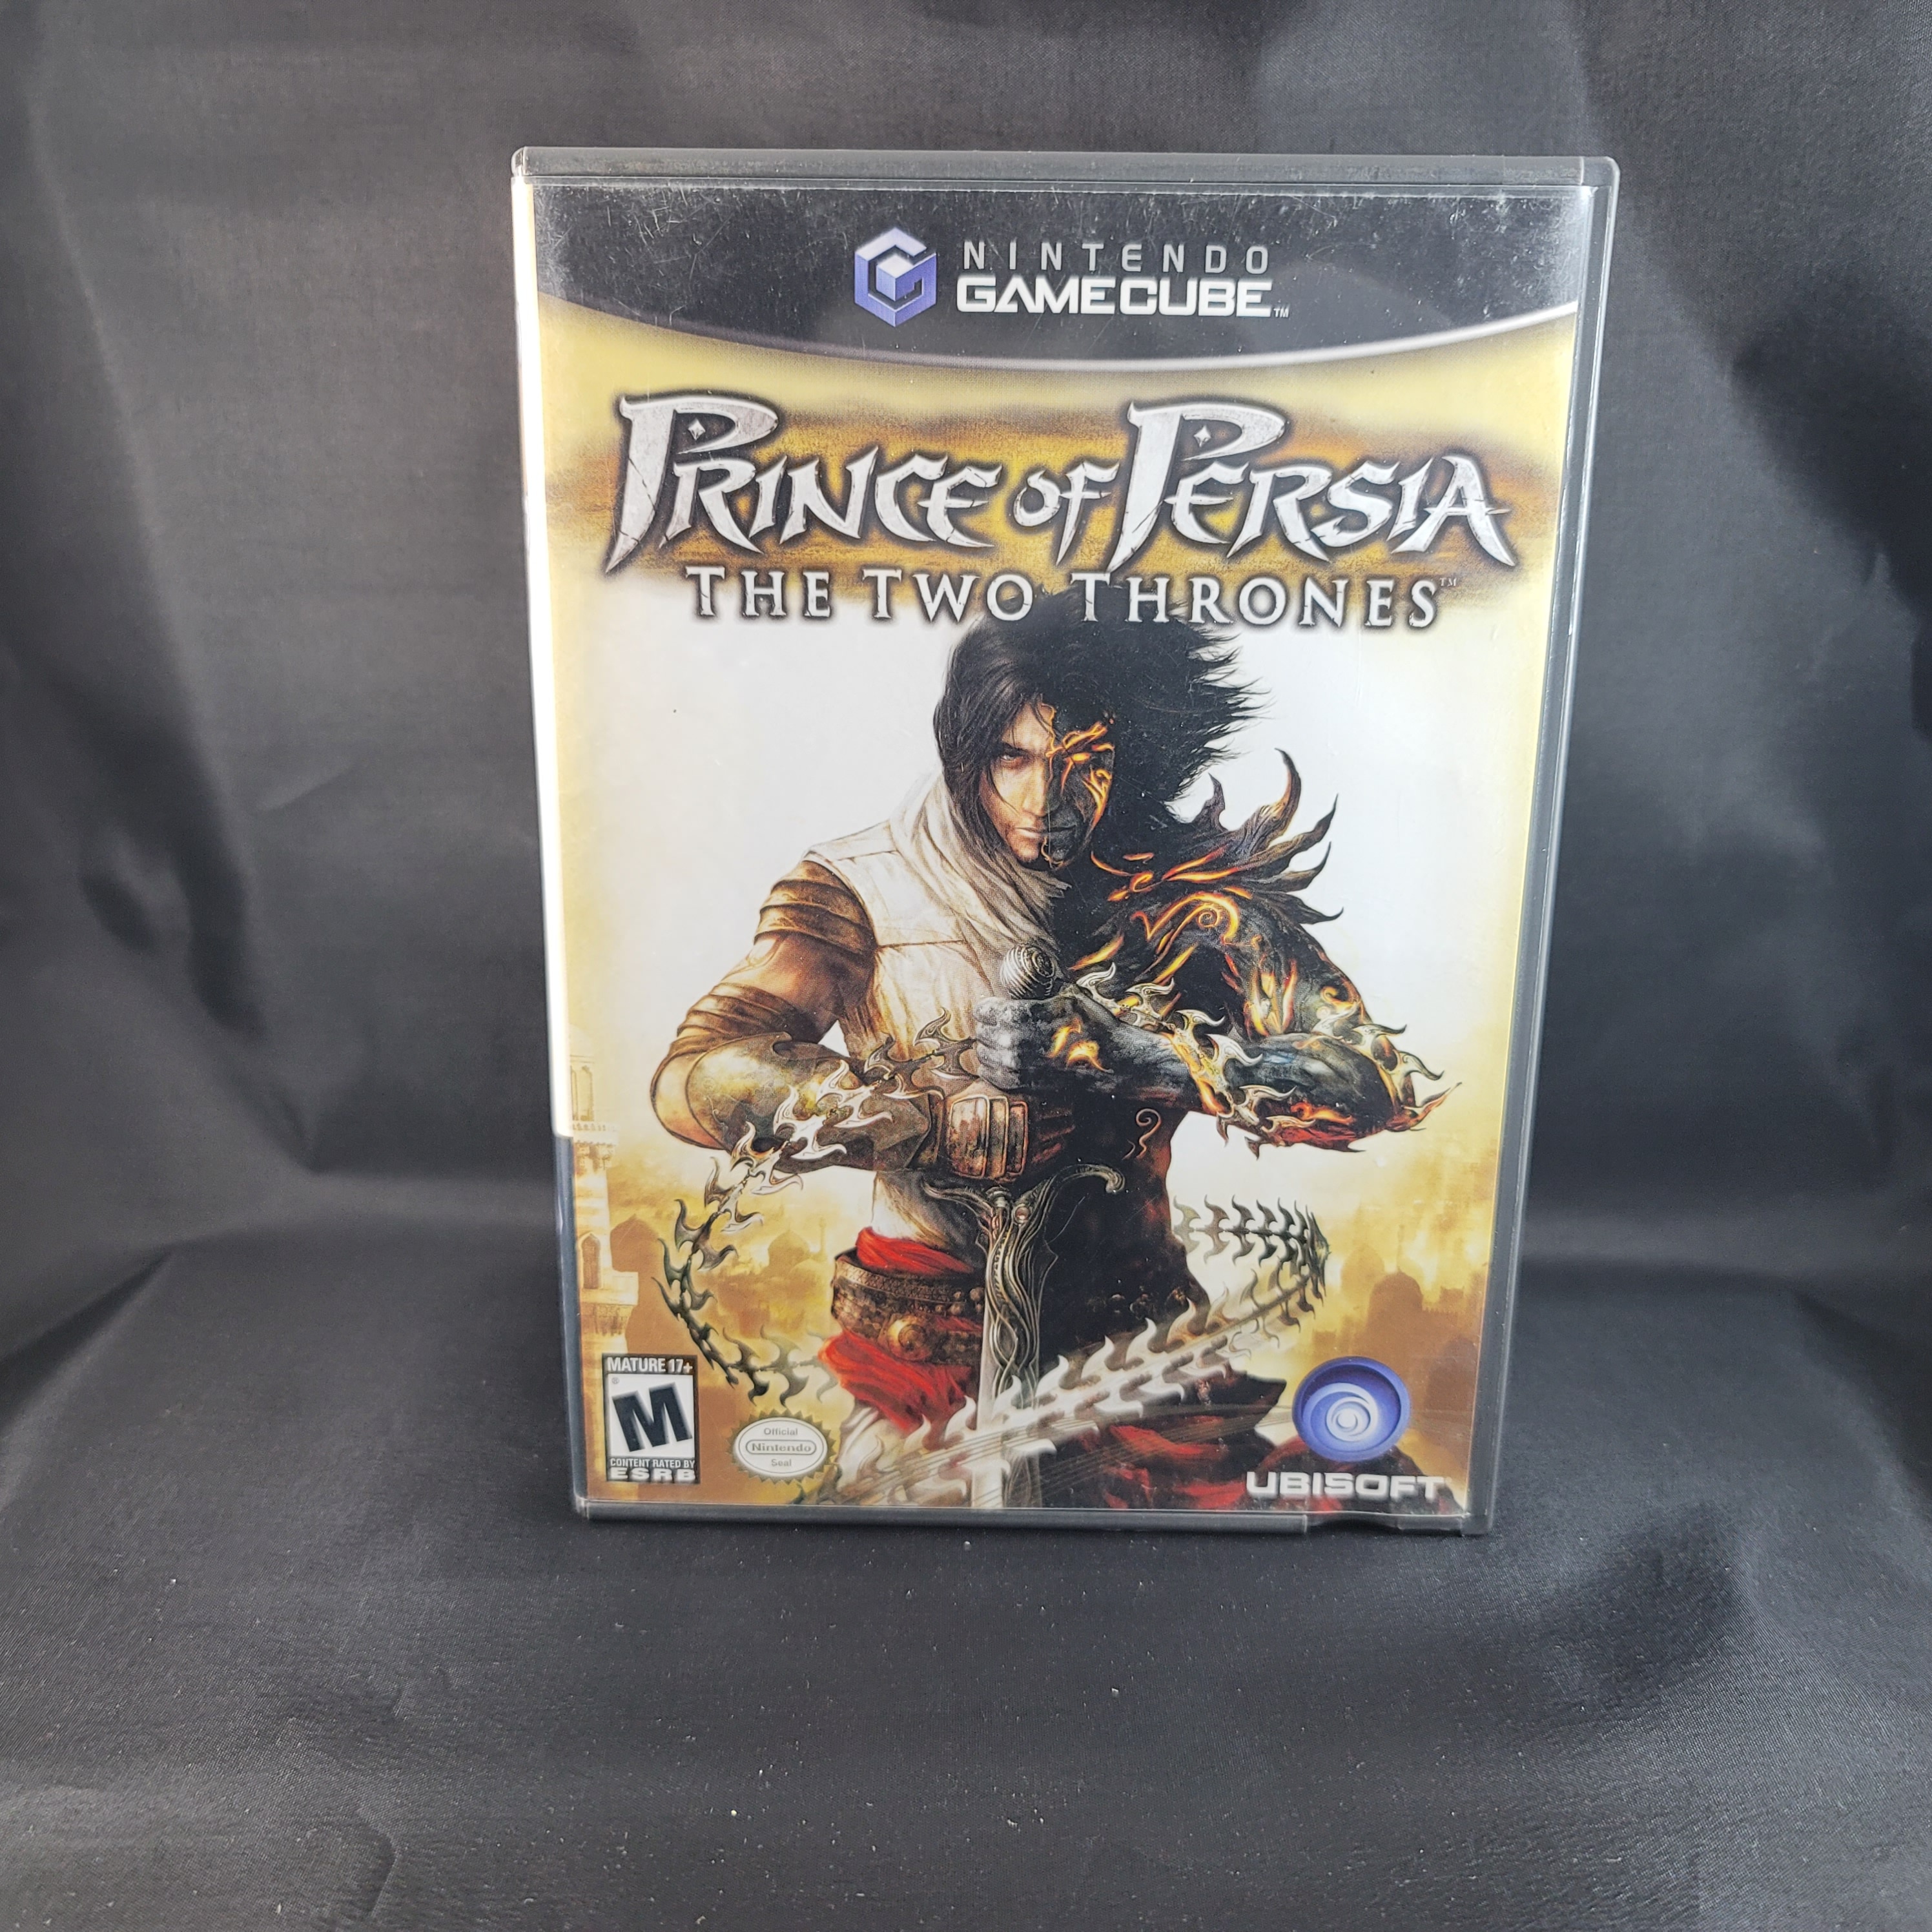 Prince of Persia: The Two Thrones (Nintendo GameCube, 2005) for sale online